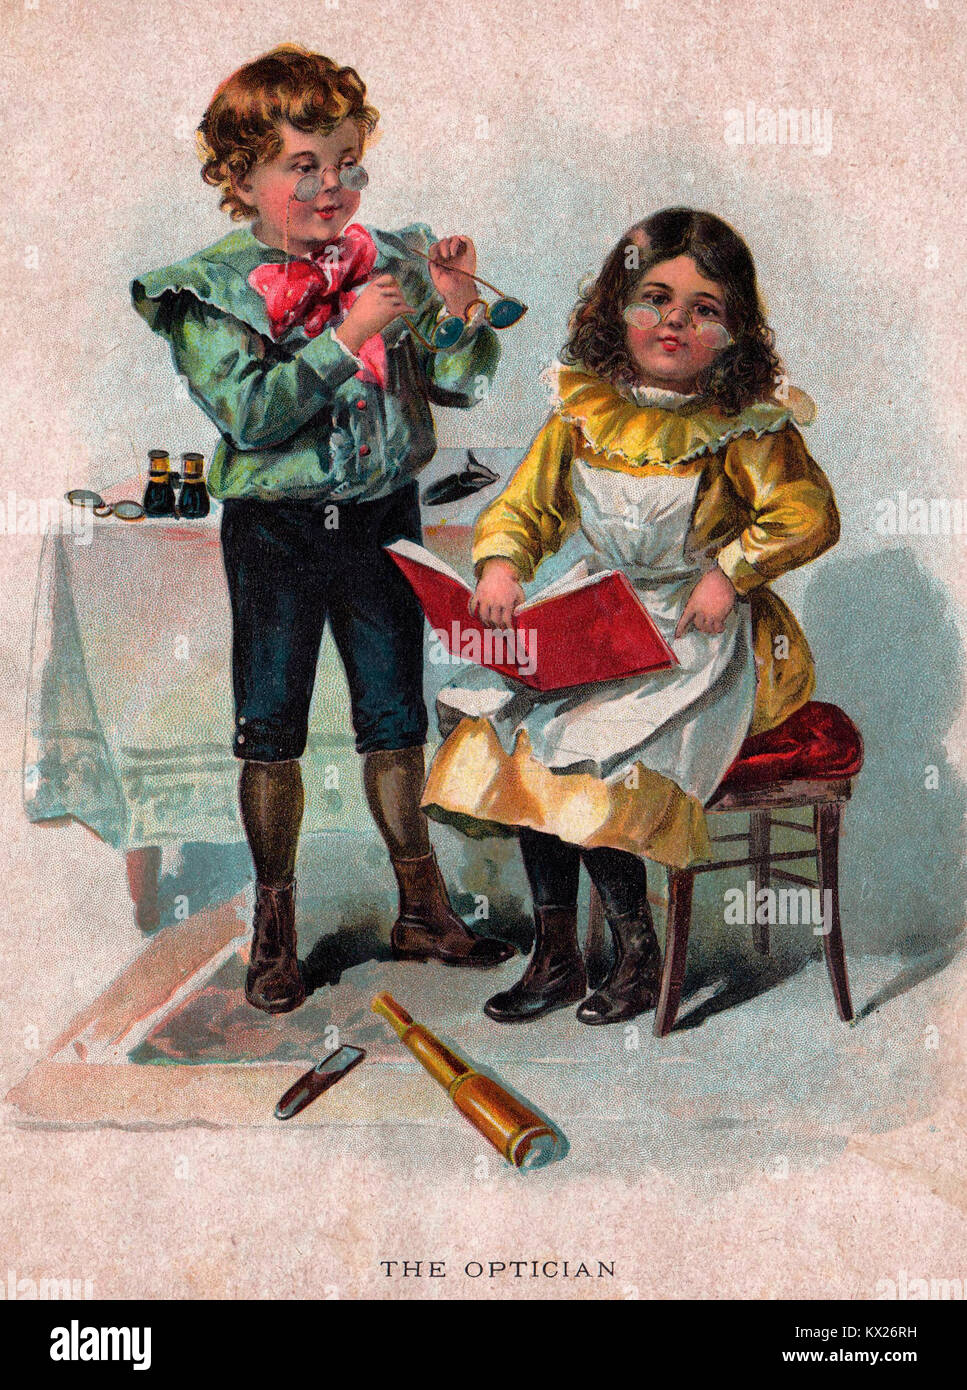 The Optician - Victorian image of Little Boy and Girl playing Optician and patient Stock Photo